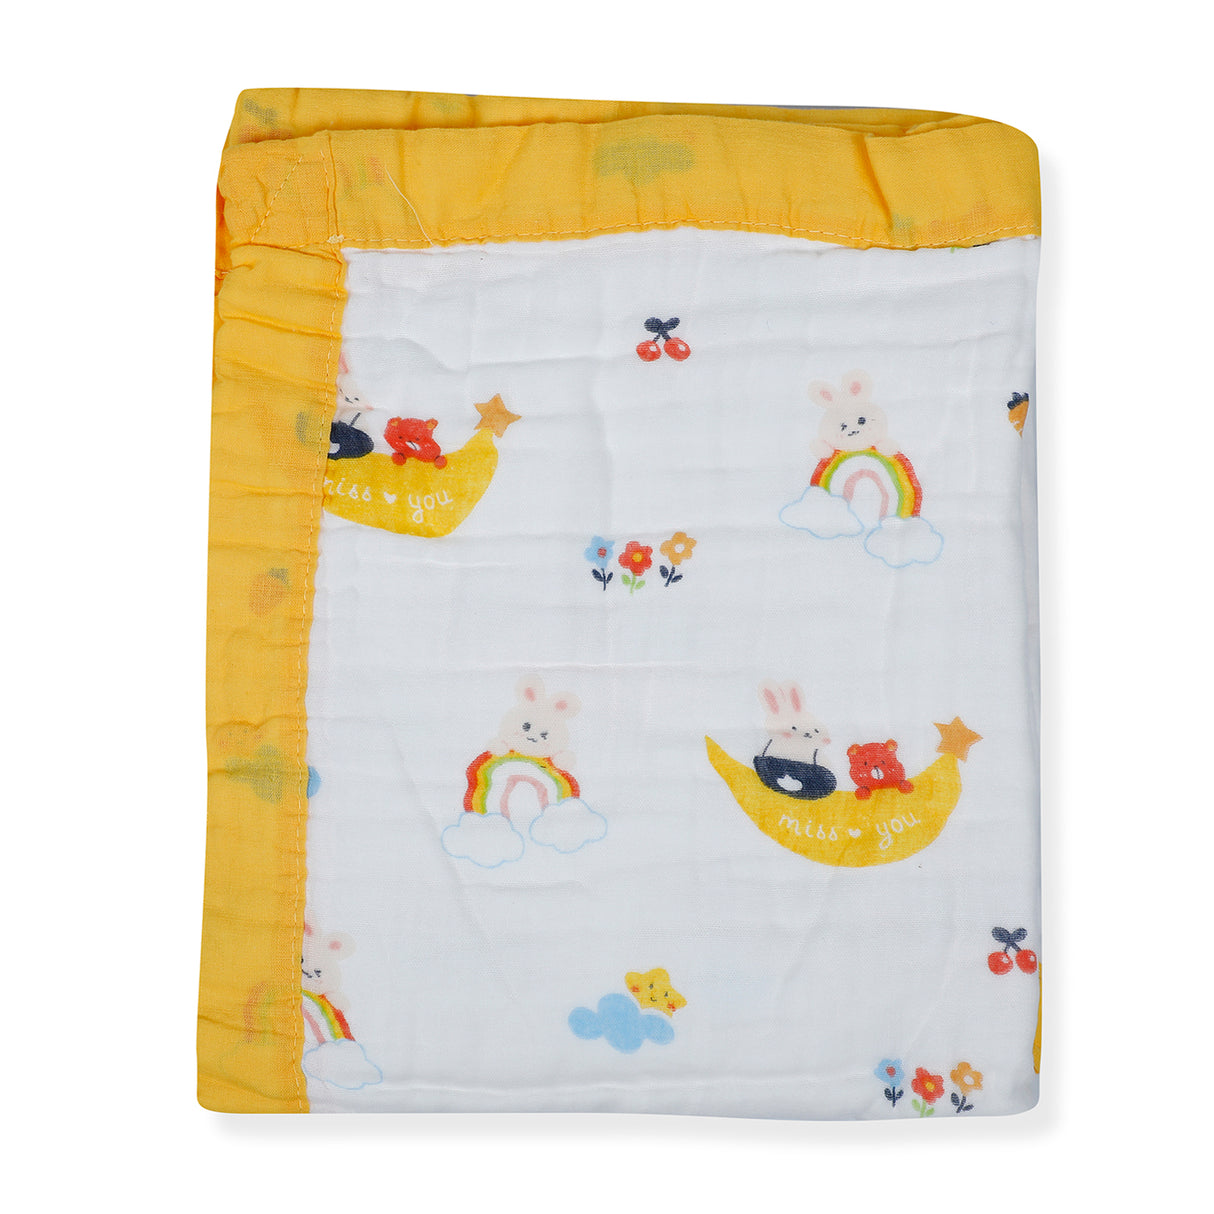 6 Layer Breathable Soft Cotton Muslin Blanket